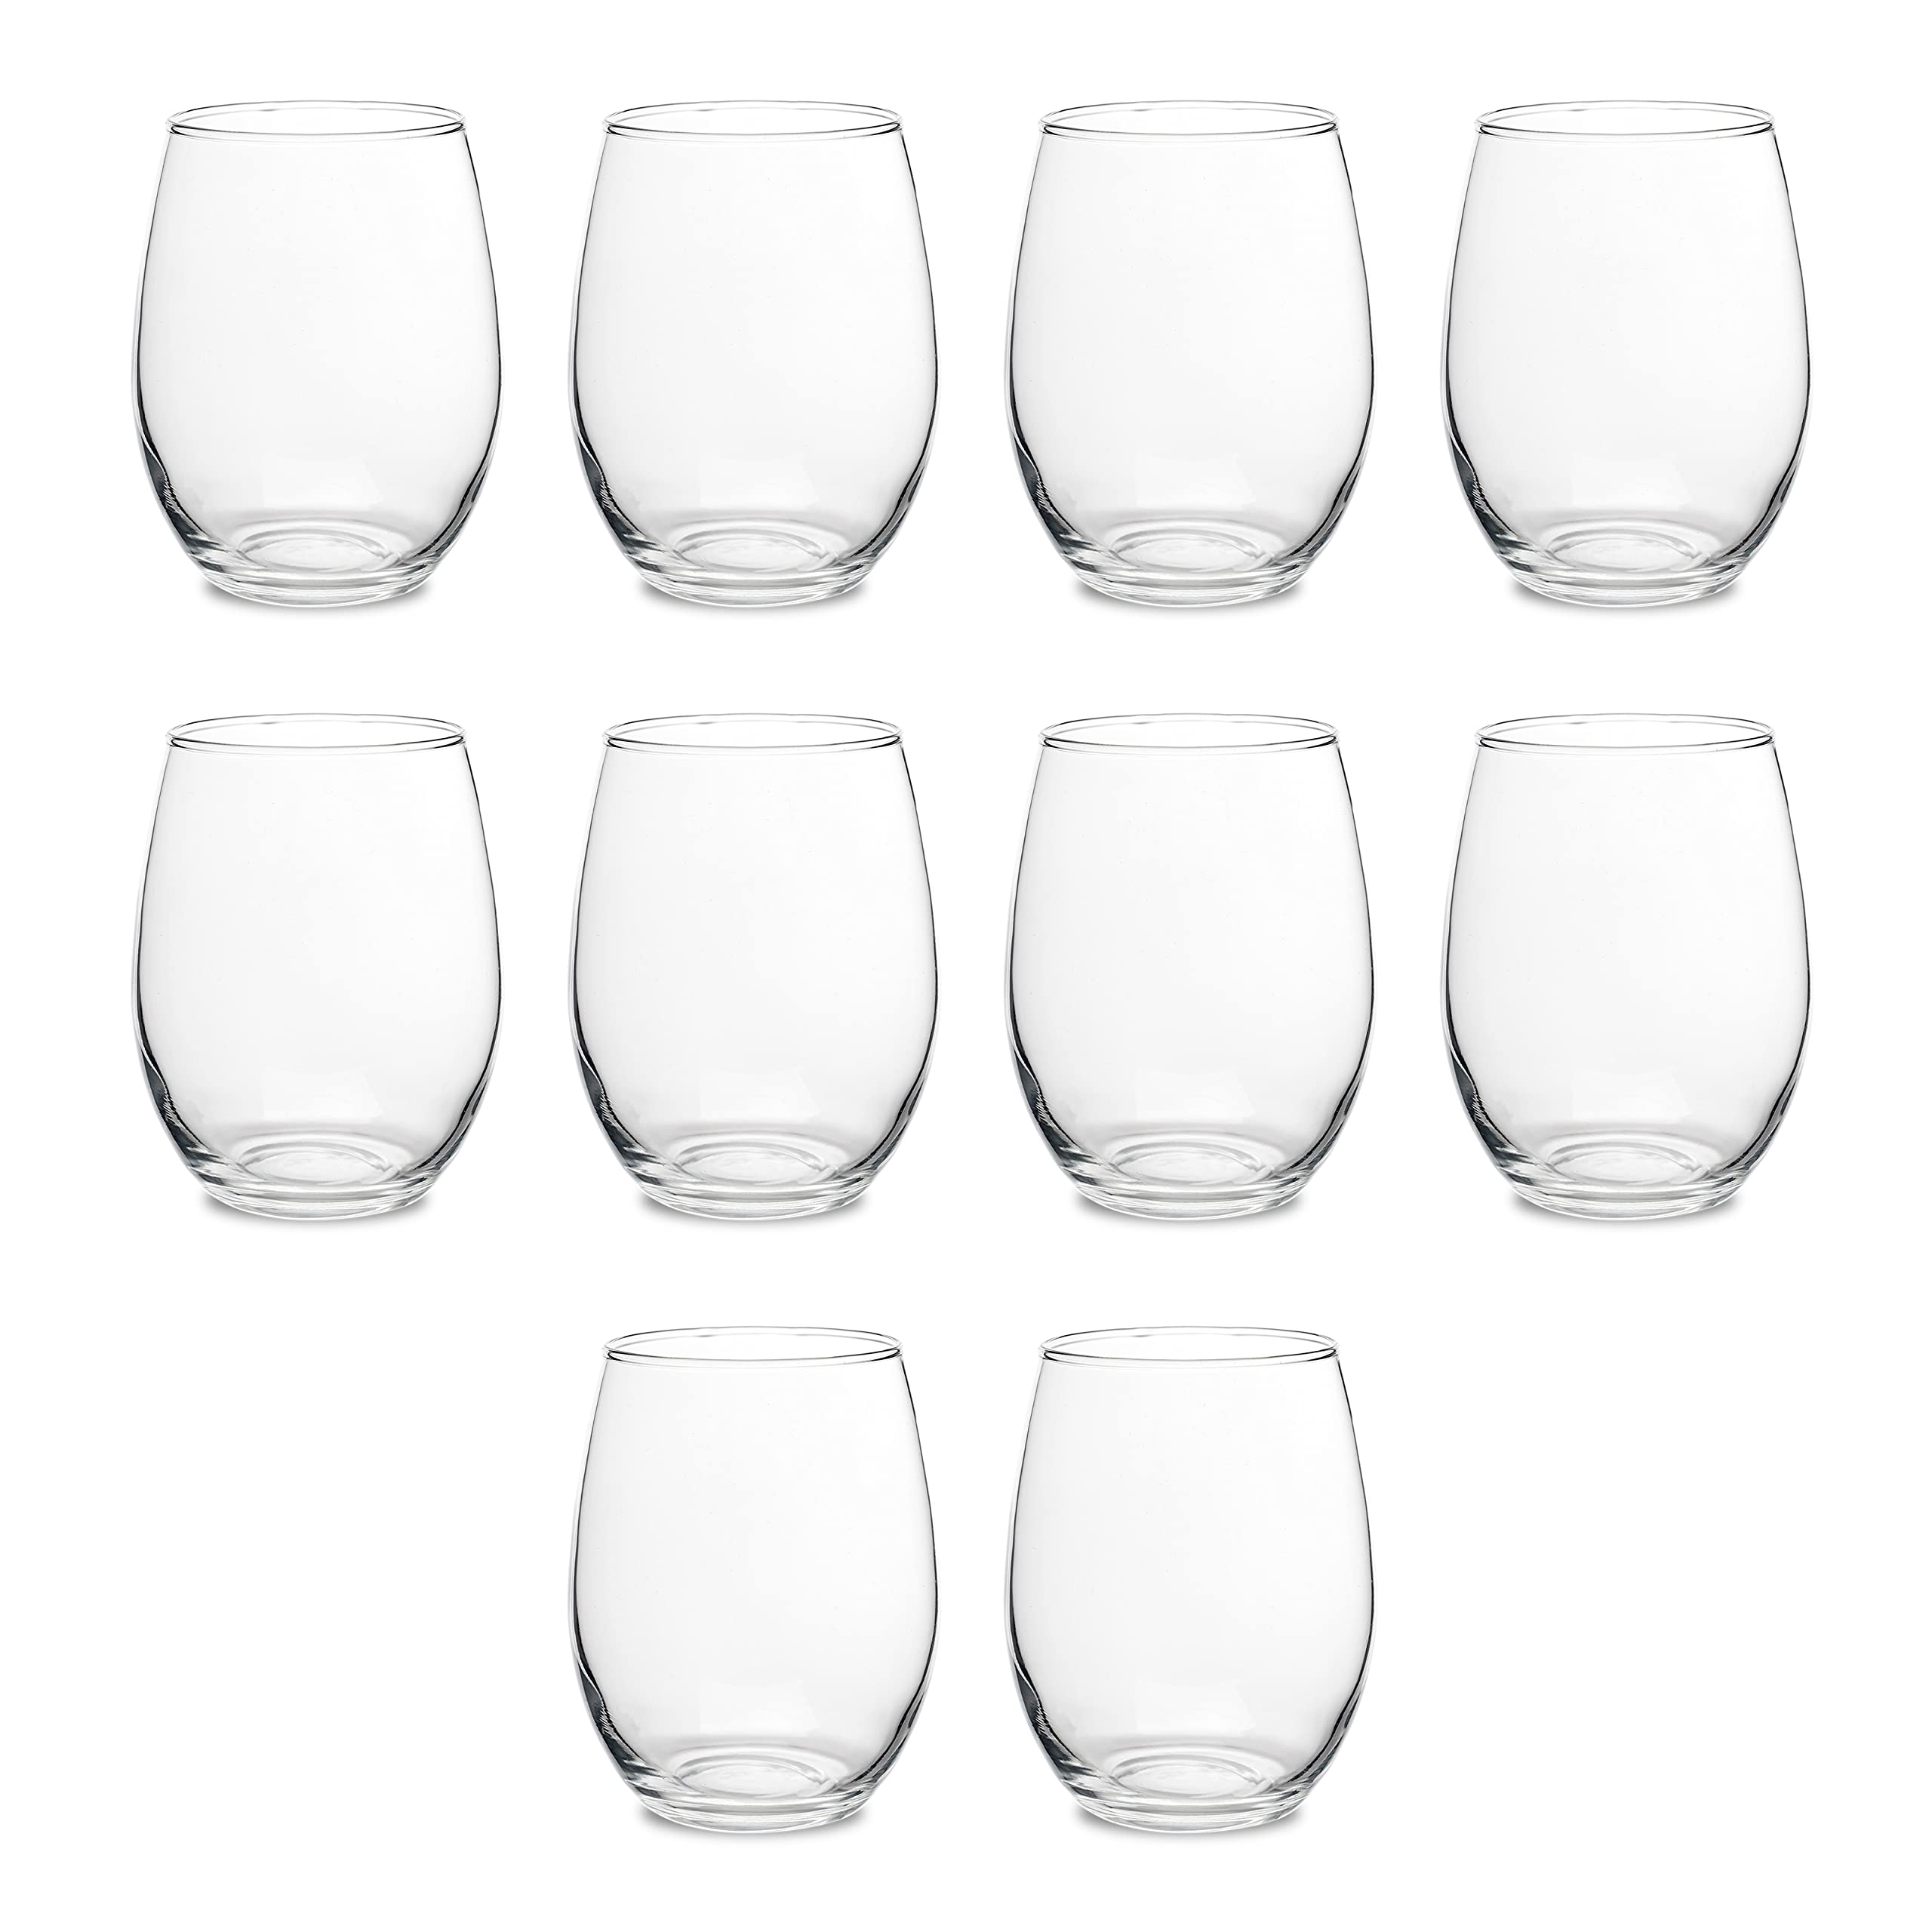 Stemless Wine Glasses by ARC Perfection 15 oz. Set of 10, Bulk Pack - Restaurant Glassware, Perfect for Red Wine, White Wine, Cocktails - Clear